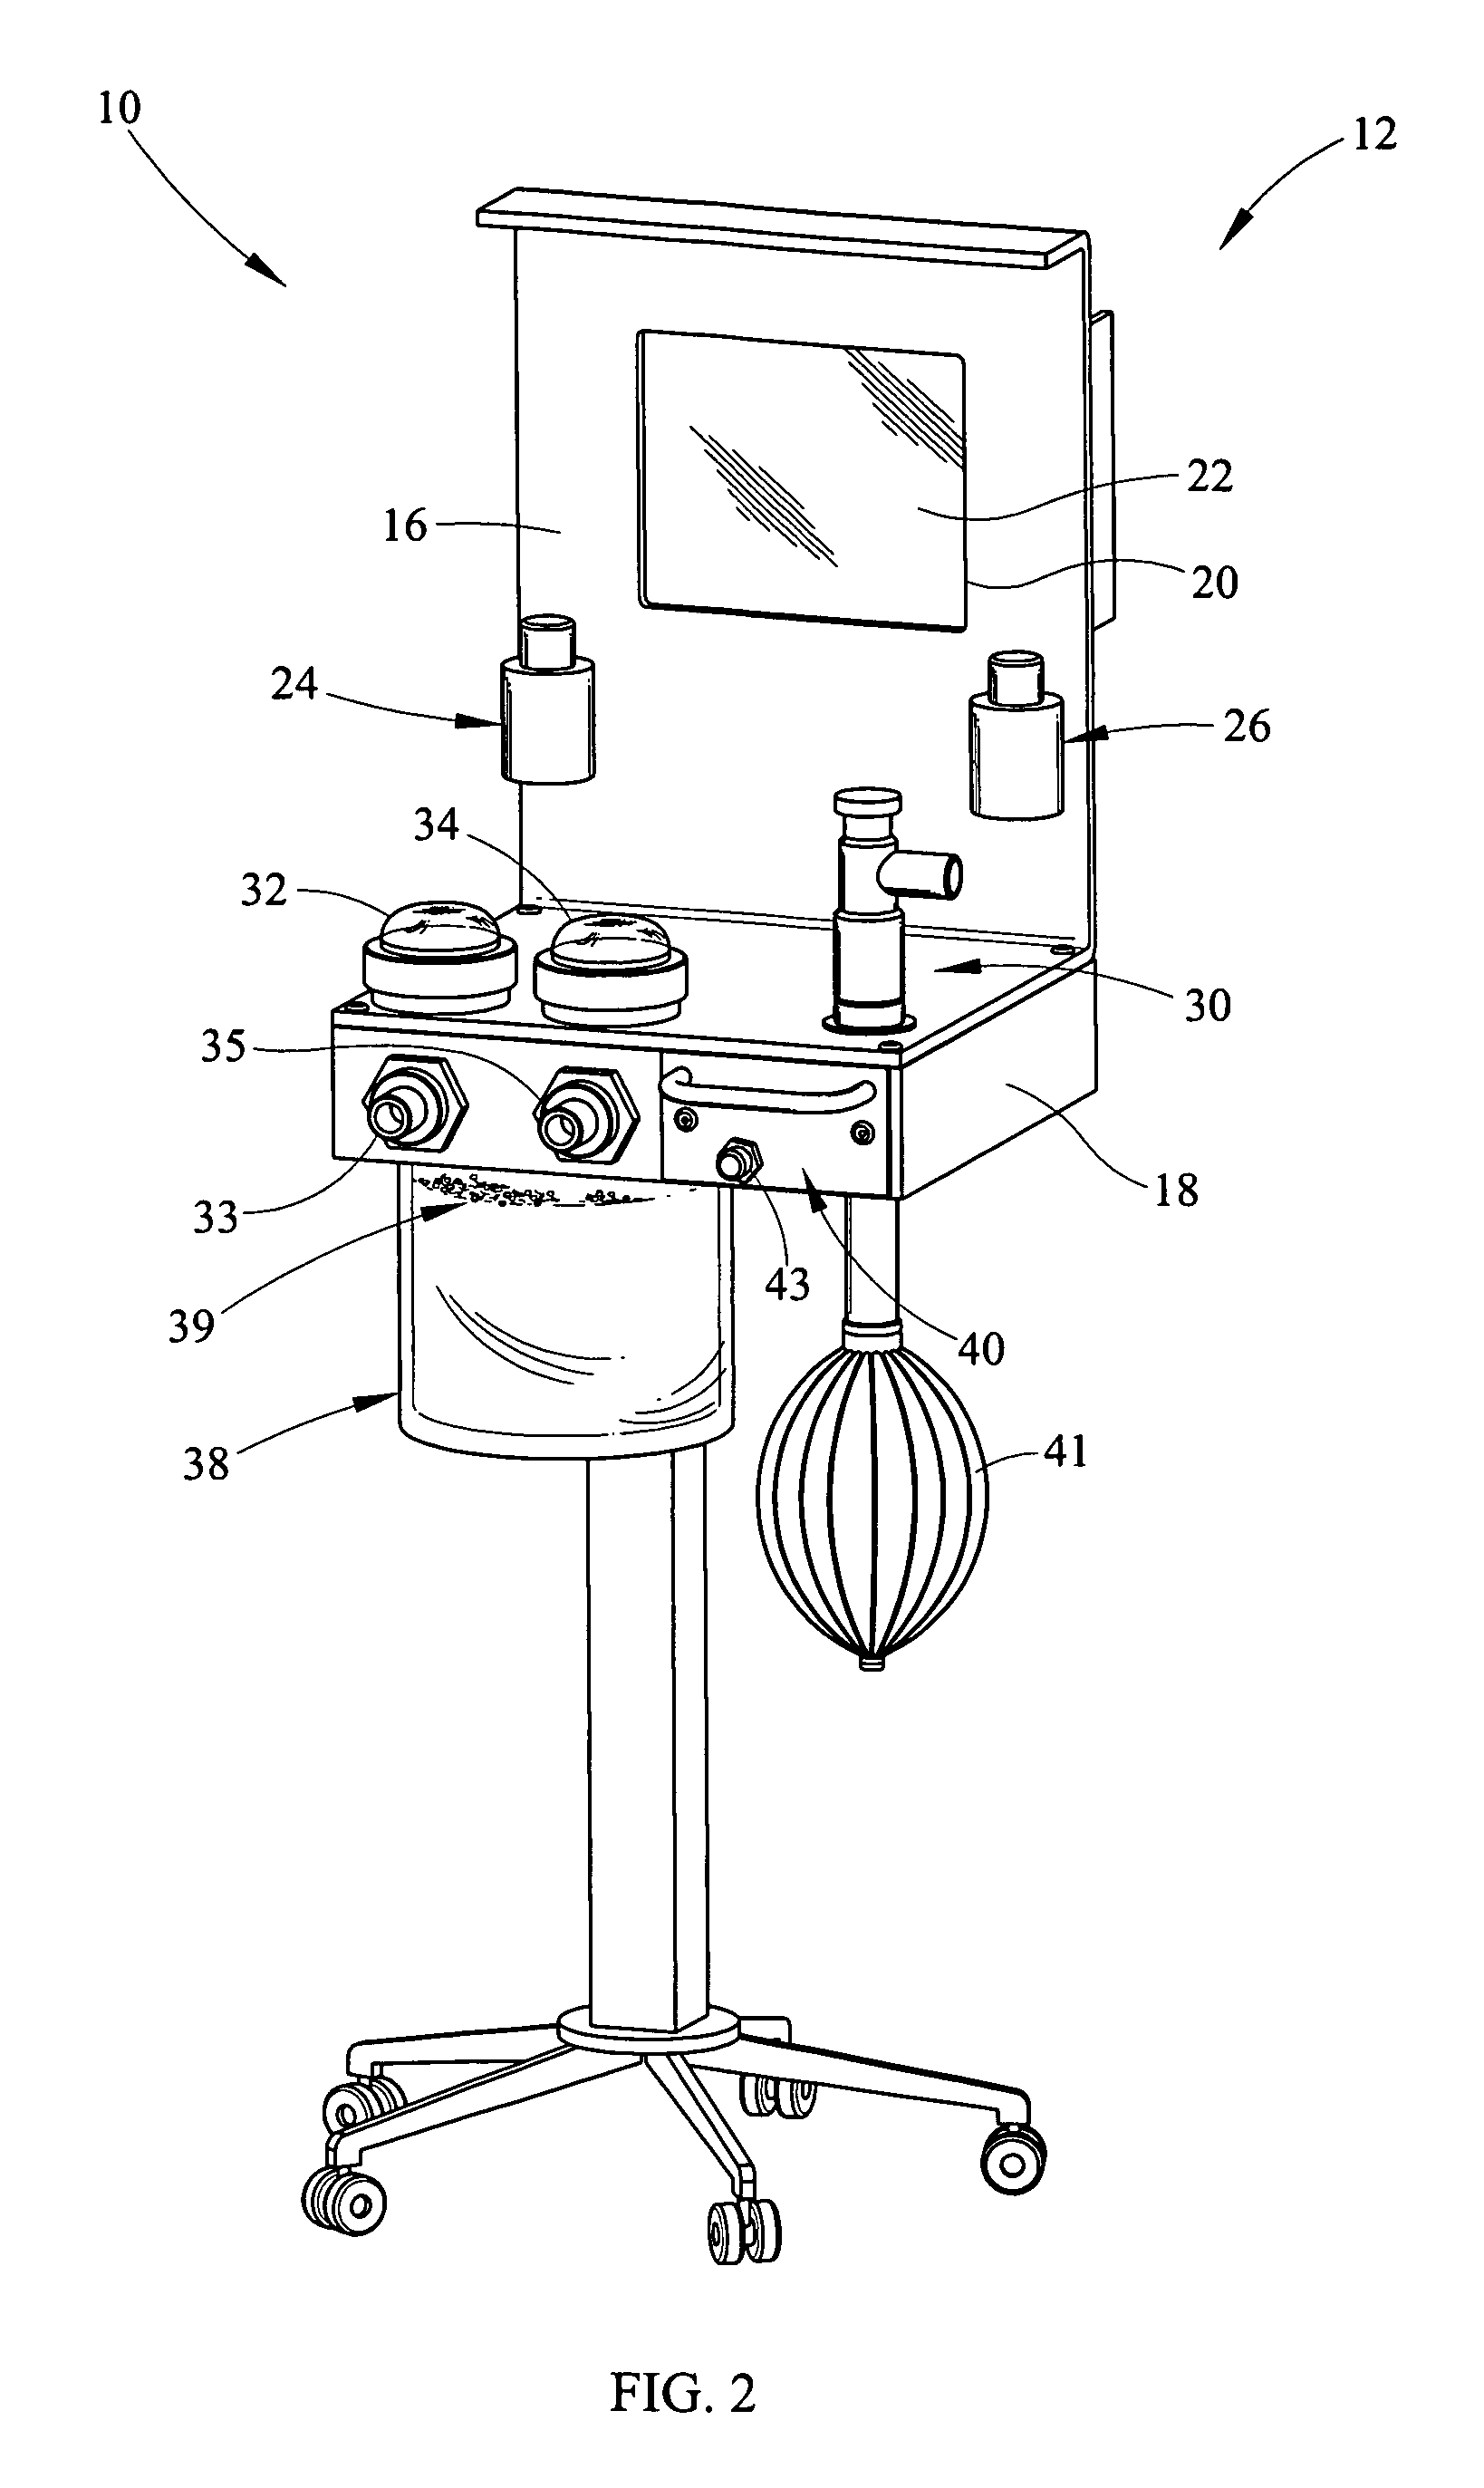 Electronic anesthesia delivery apparatus